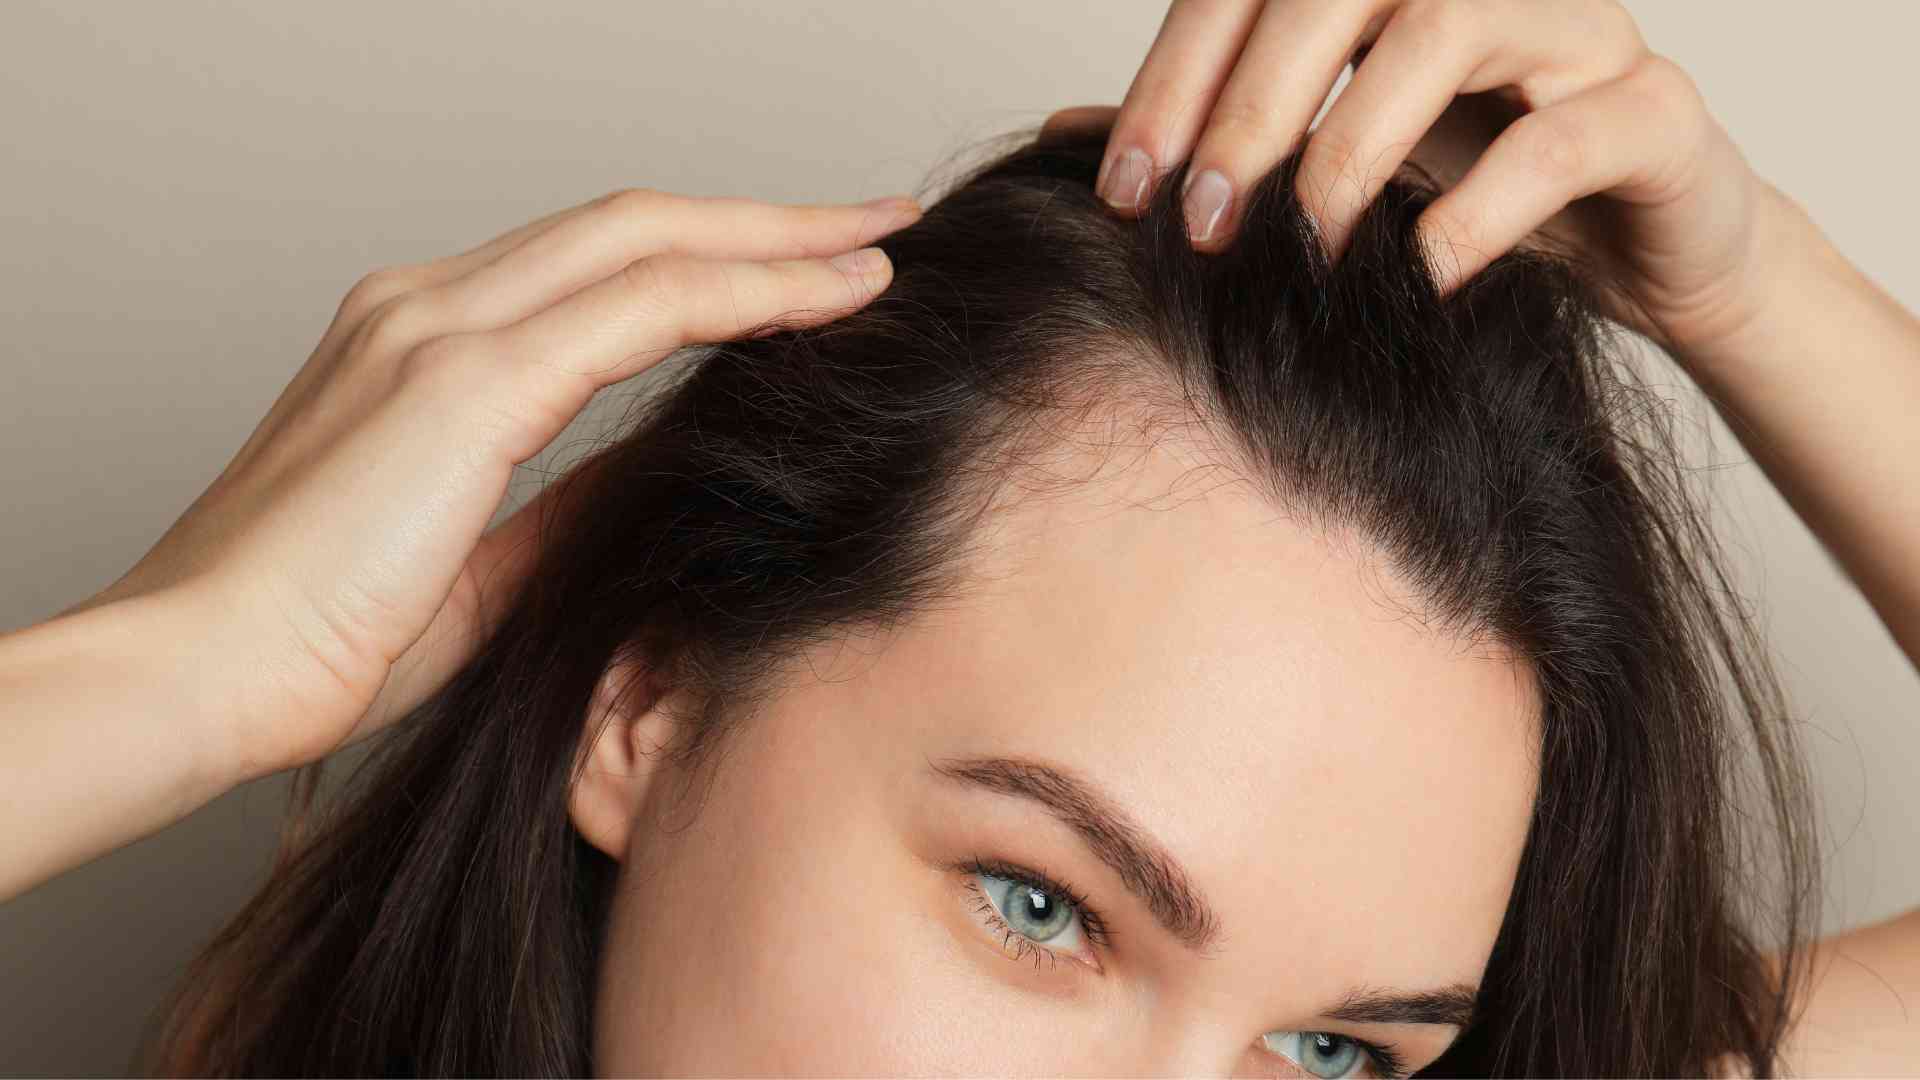 What is traction alopecia and what causes it